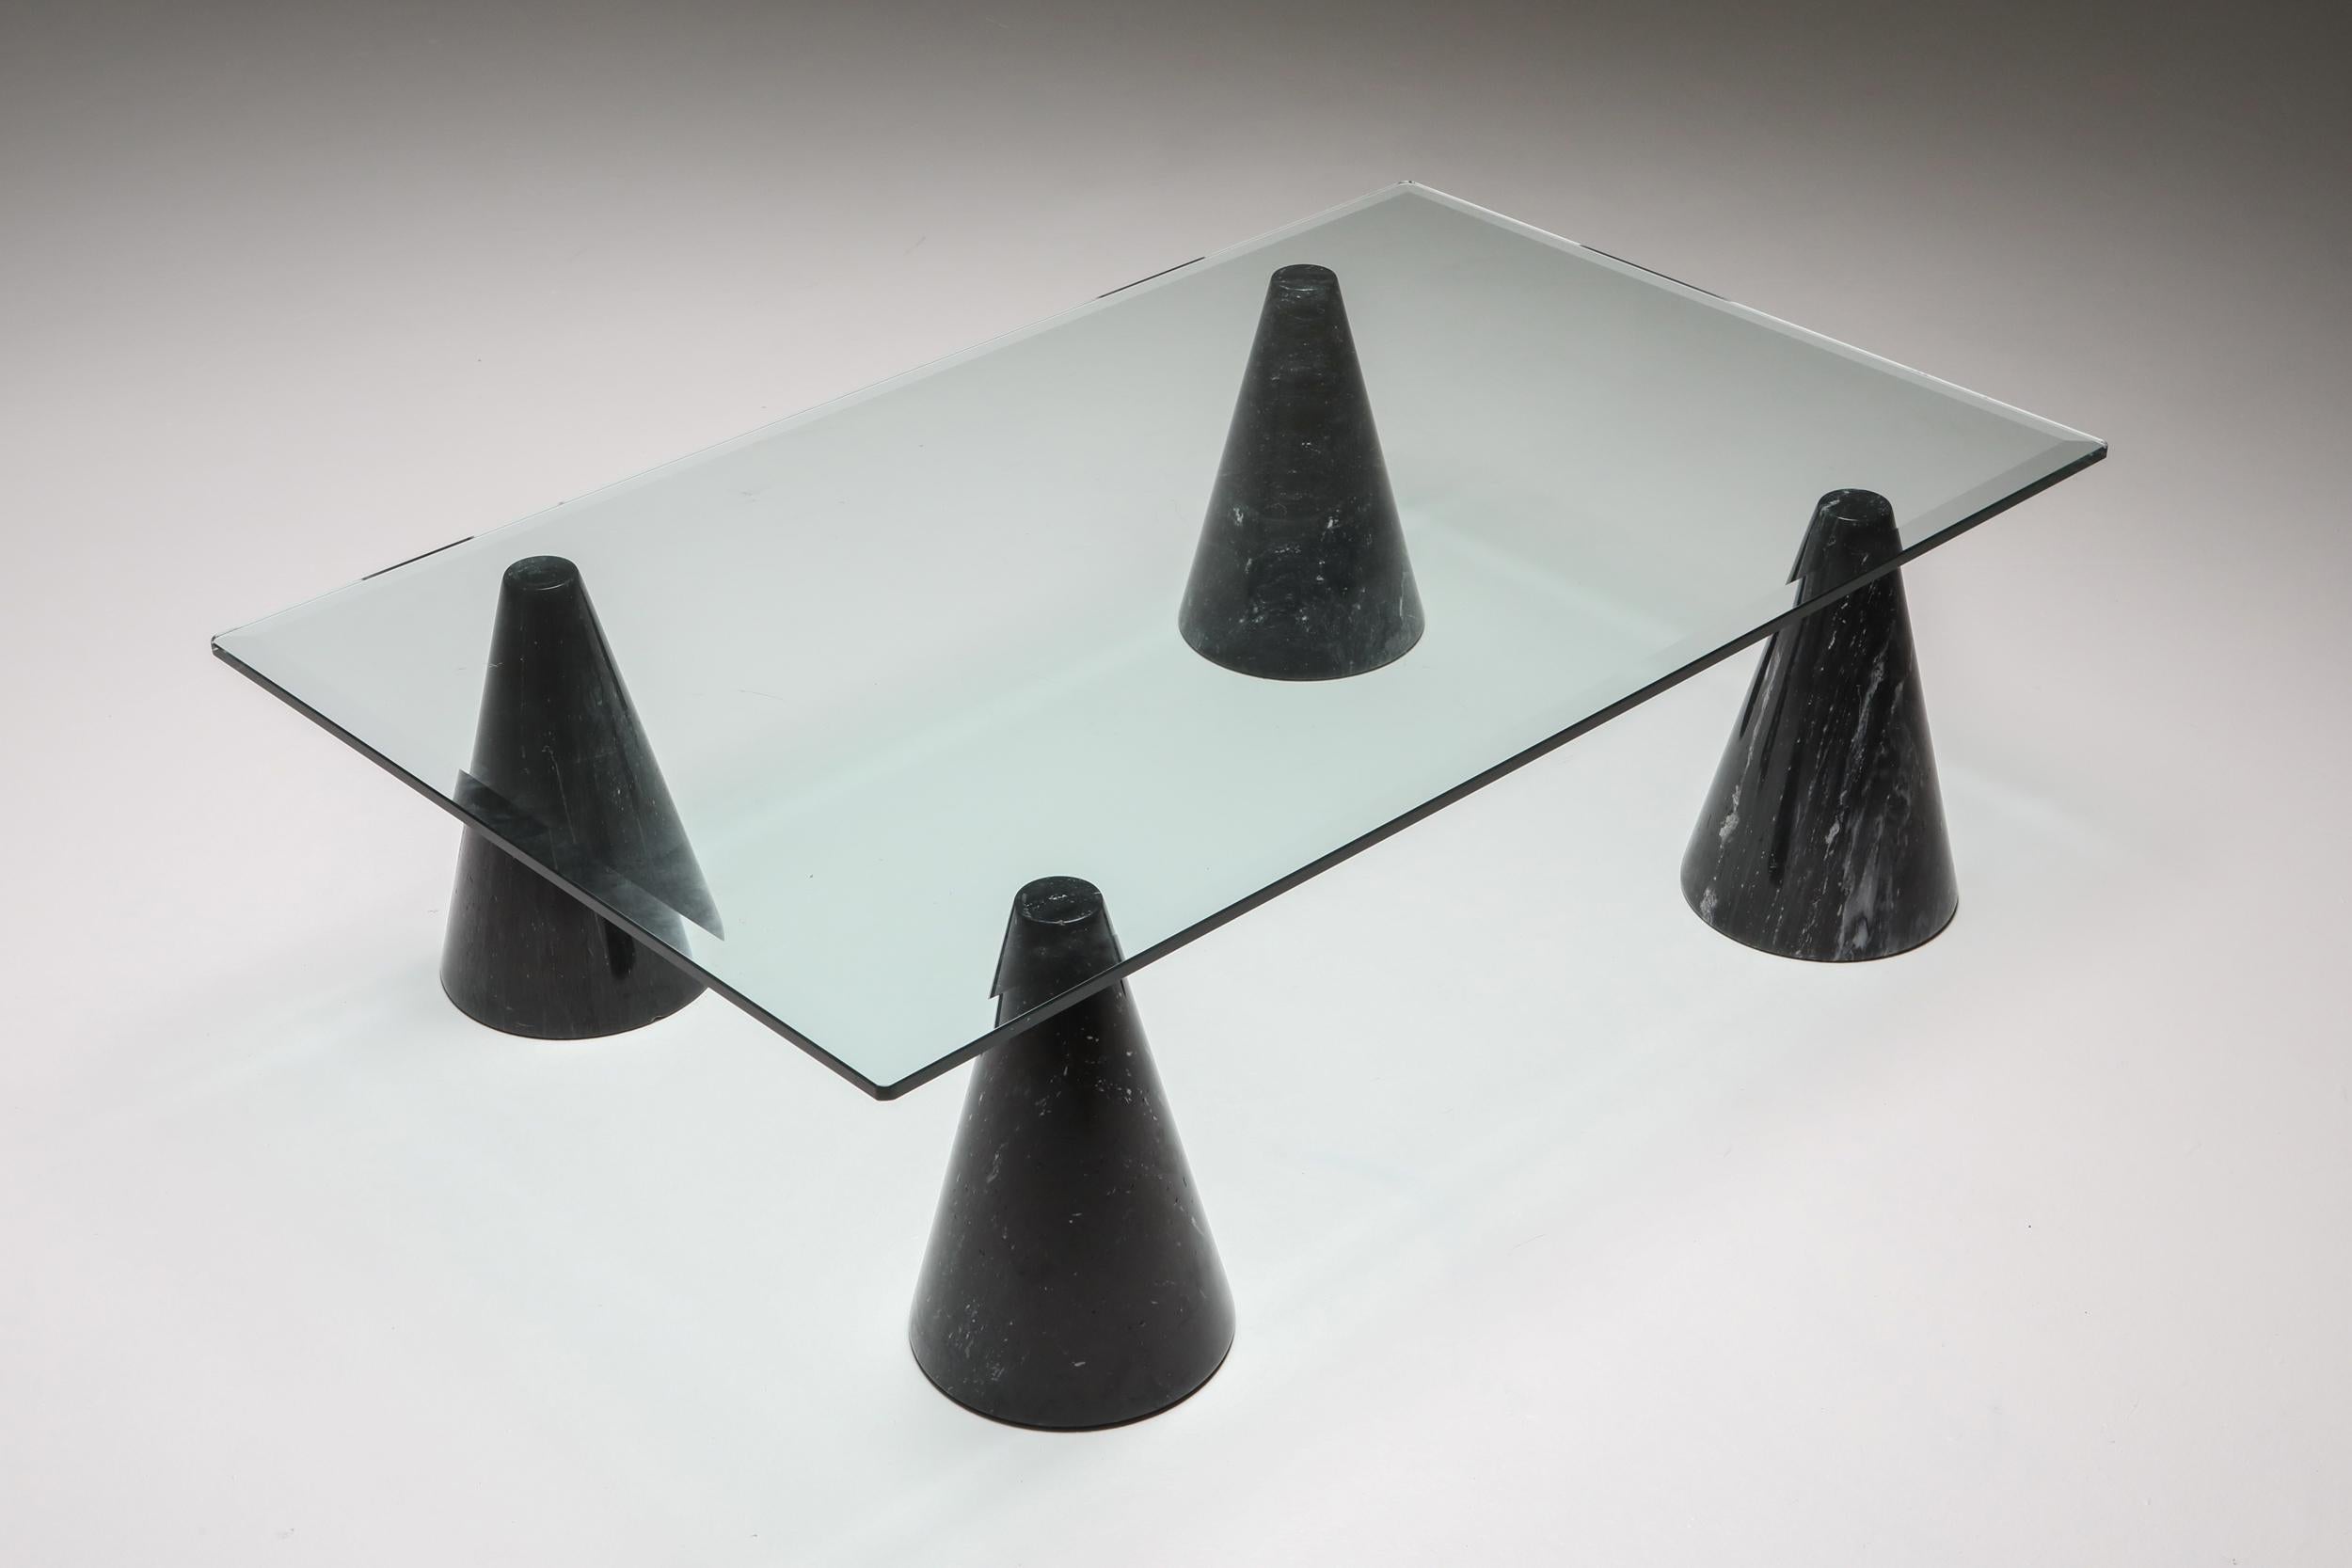 Postmodern Italian coffee table in the style of Massimo Vignelli. 

This features 4 black marbled legs and a thick glass top. Quite a dynamic use of the marble and shapes. The combination of precious marble and glass gives an elegant touch to the